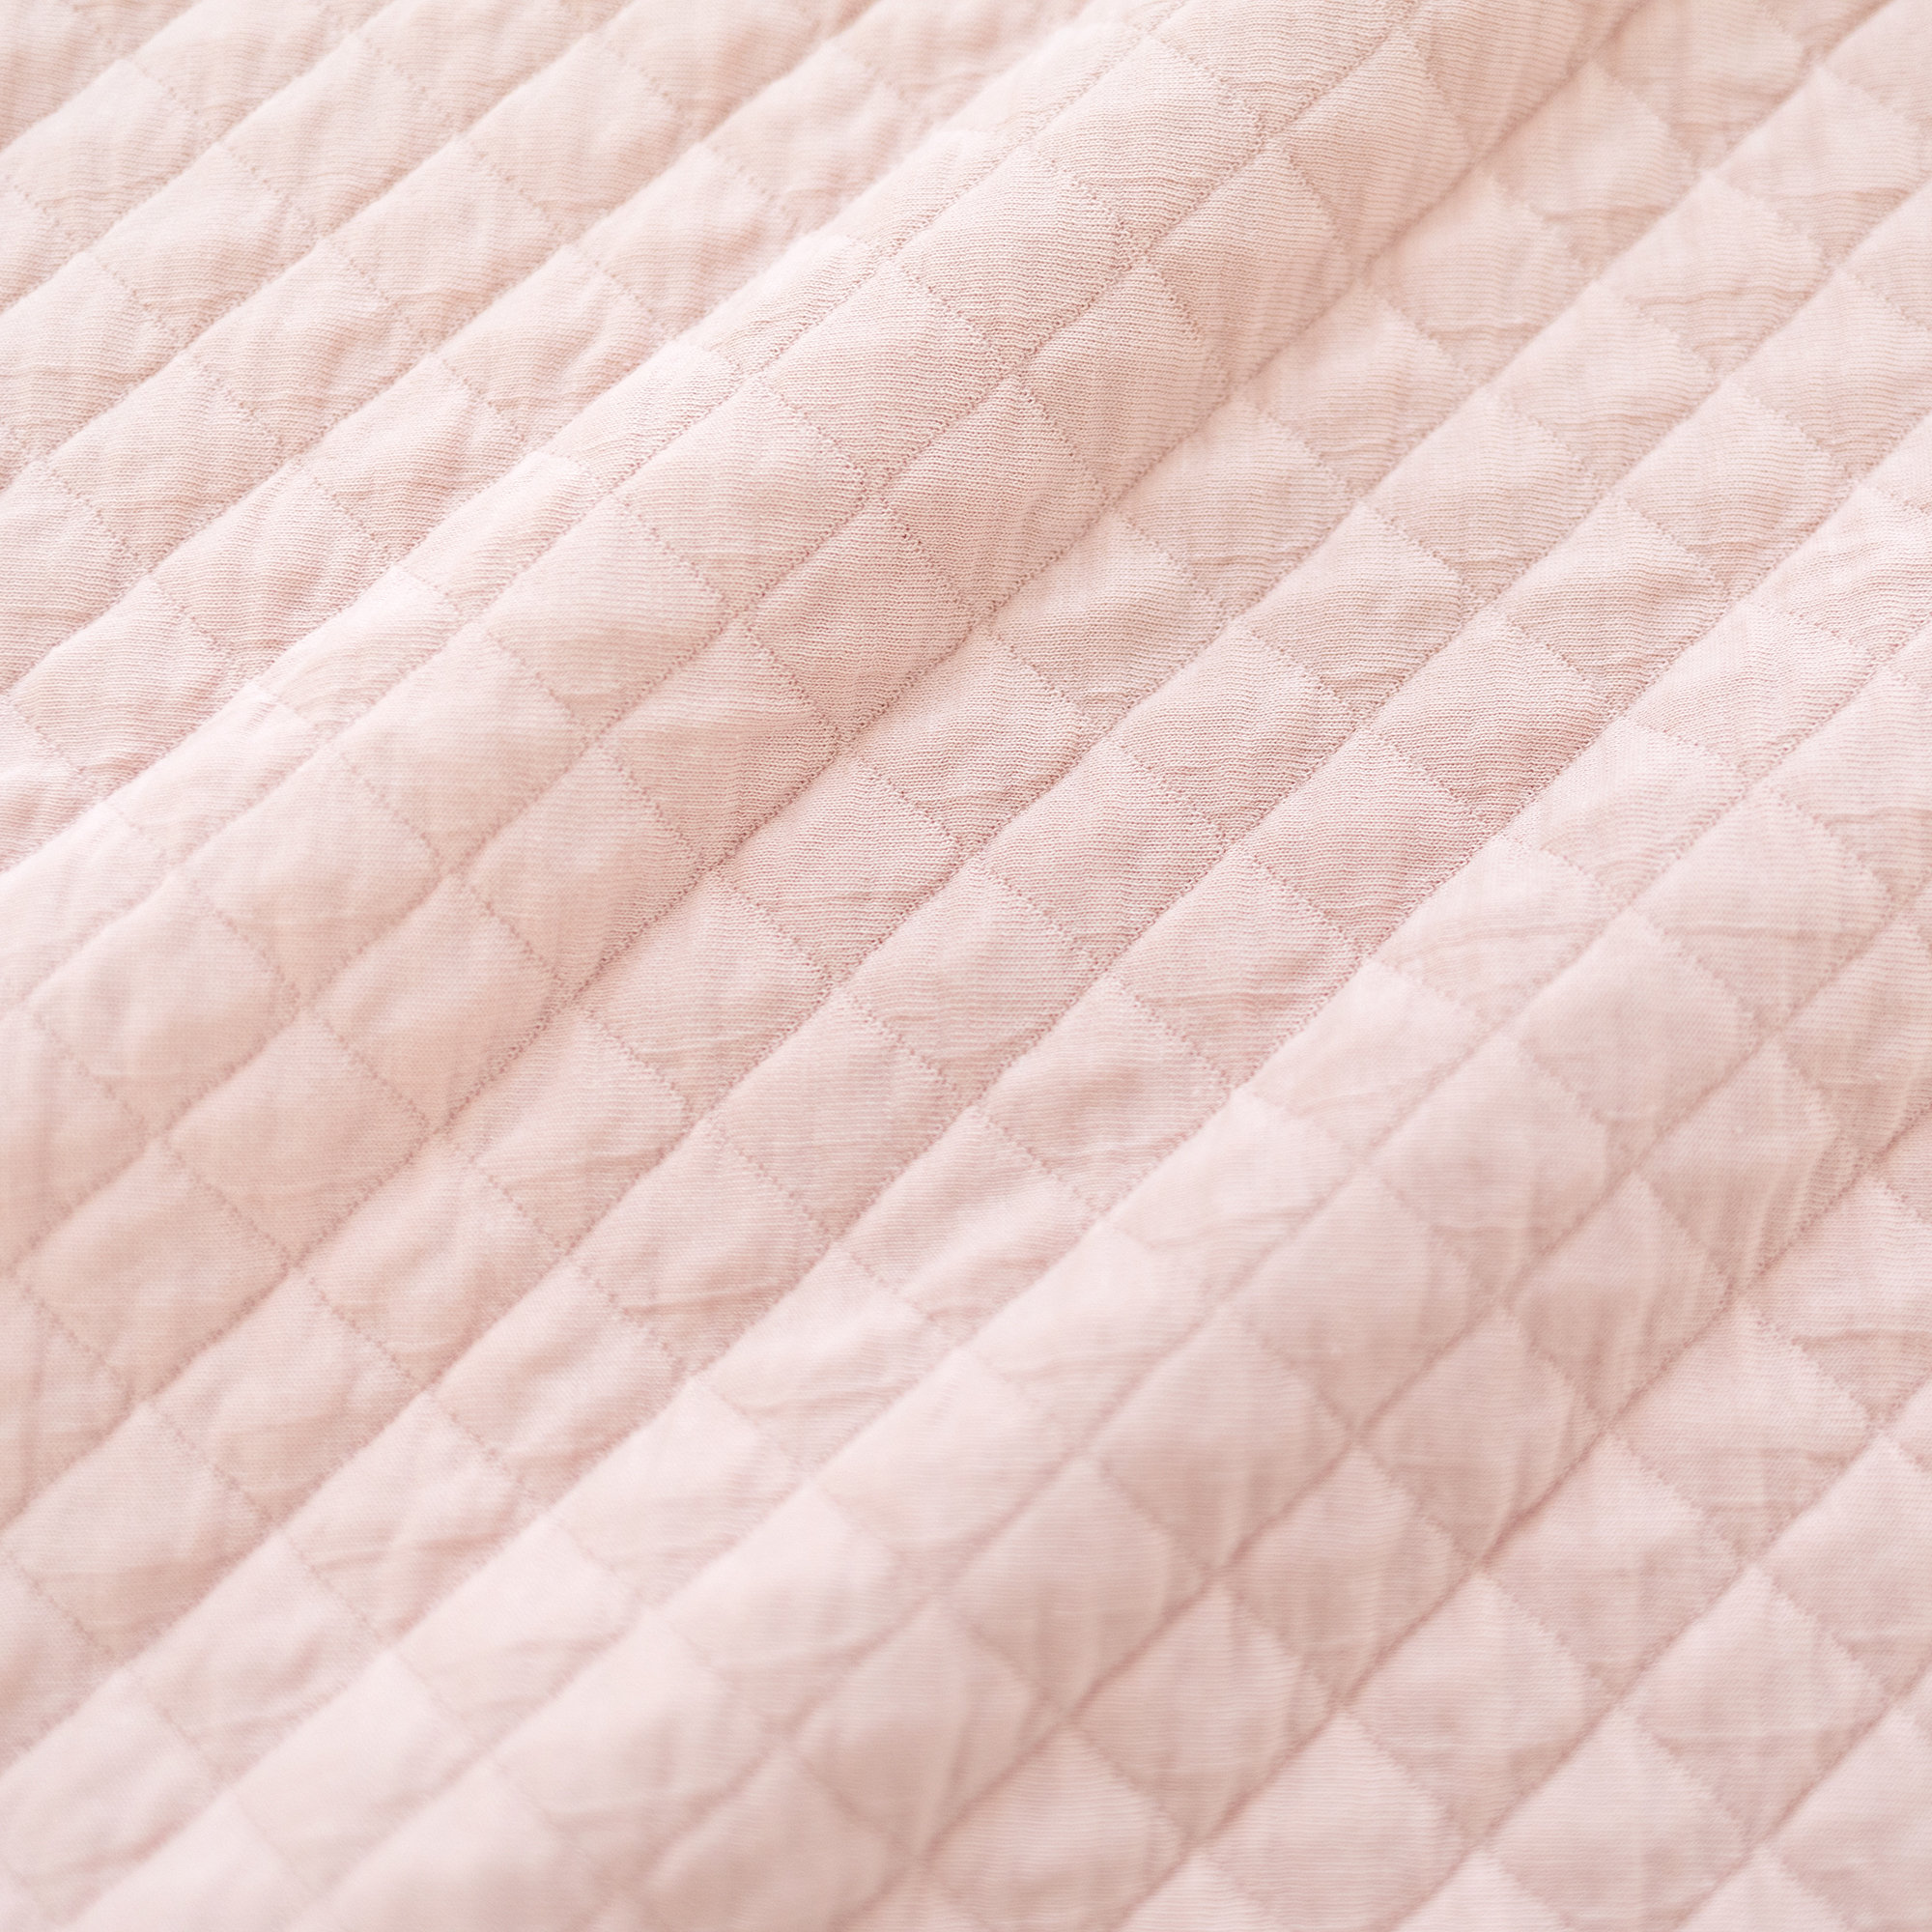 Wickelkissenbezug Pady quilted jersey 50x75cm QUILT Blush[CARE]